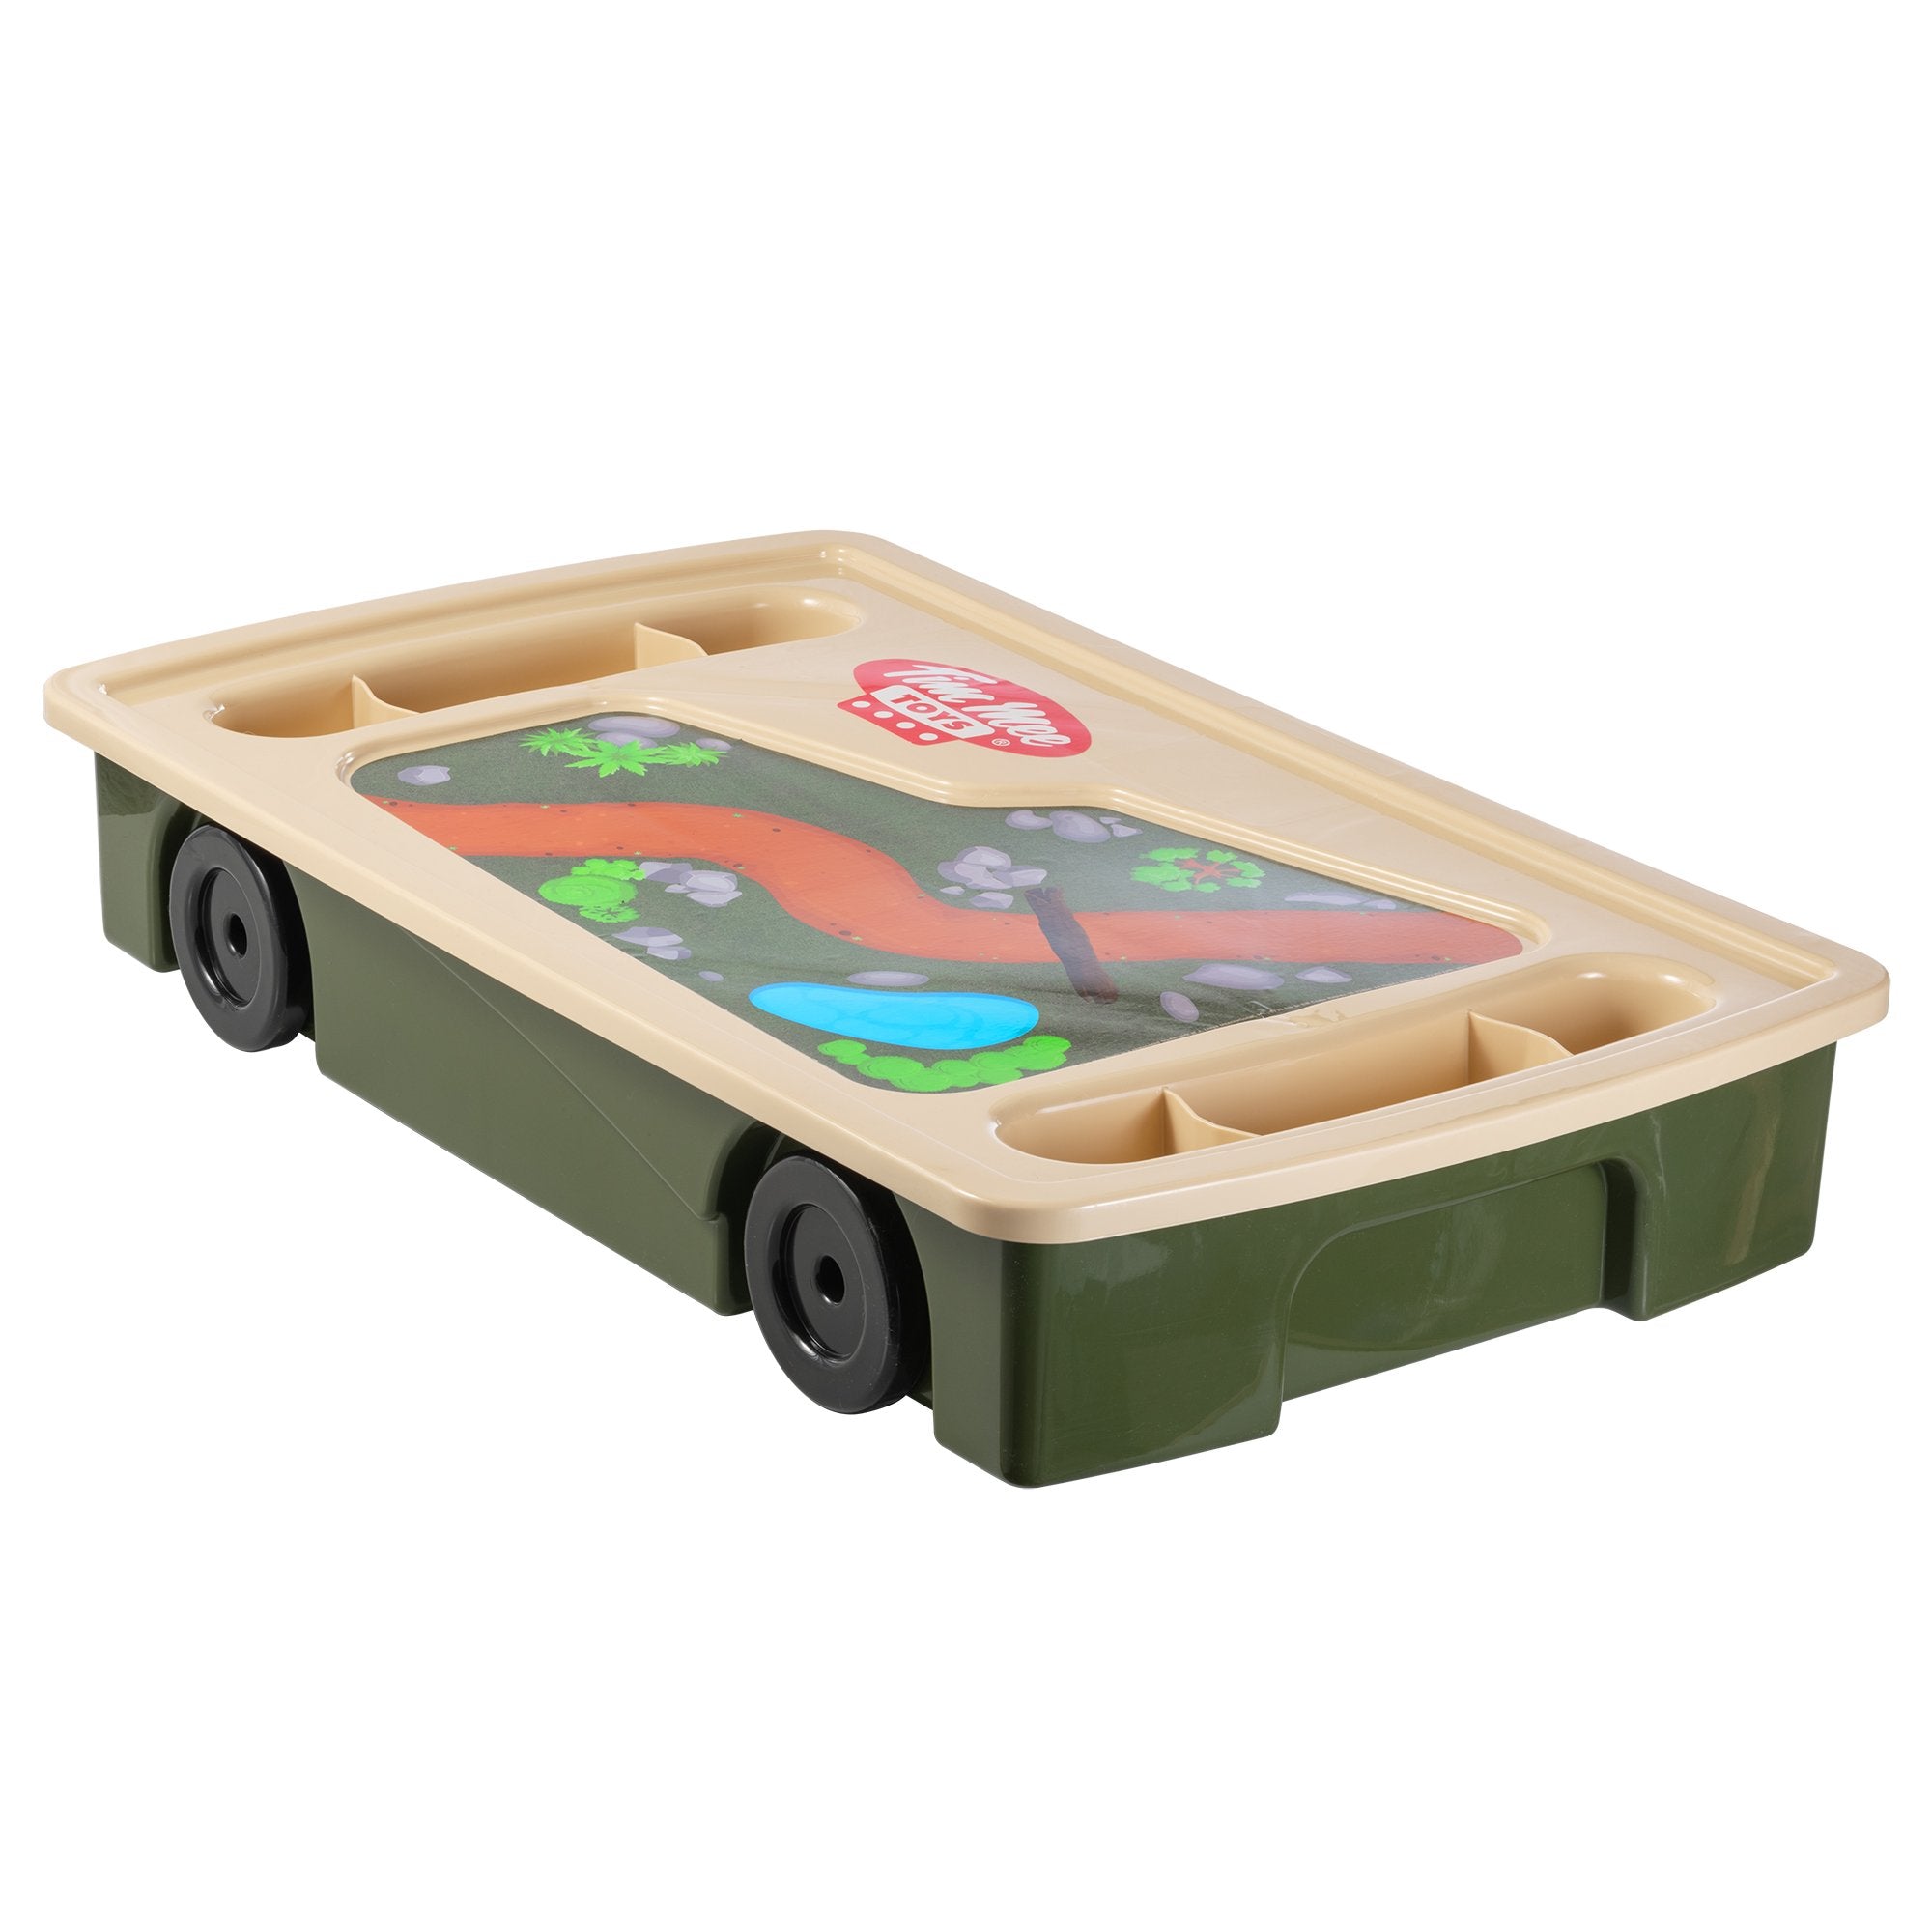 Tim Mee Toy Giant Underbed Storage Container w/ Wheels & Play Surface US Made